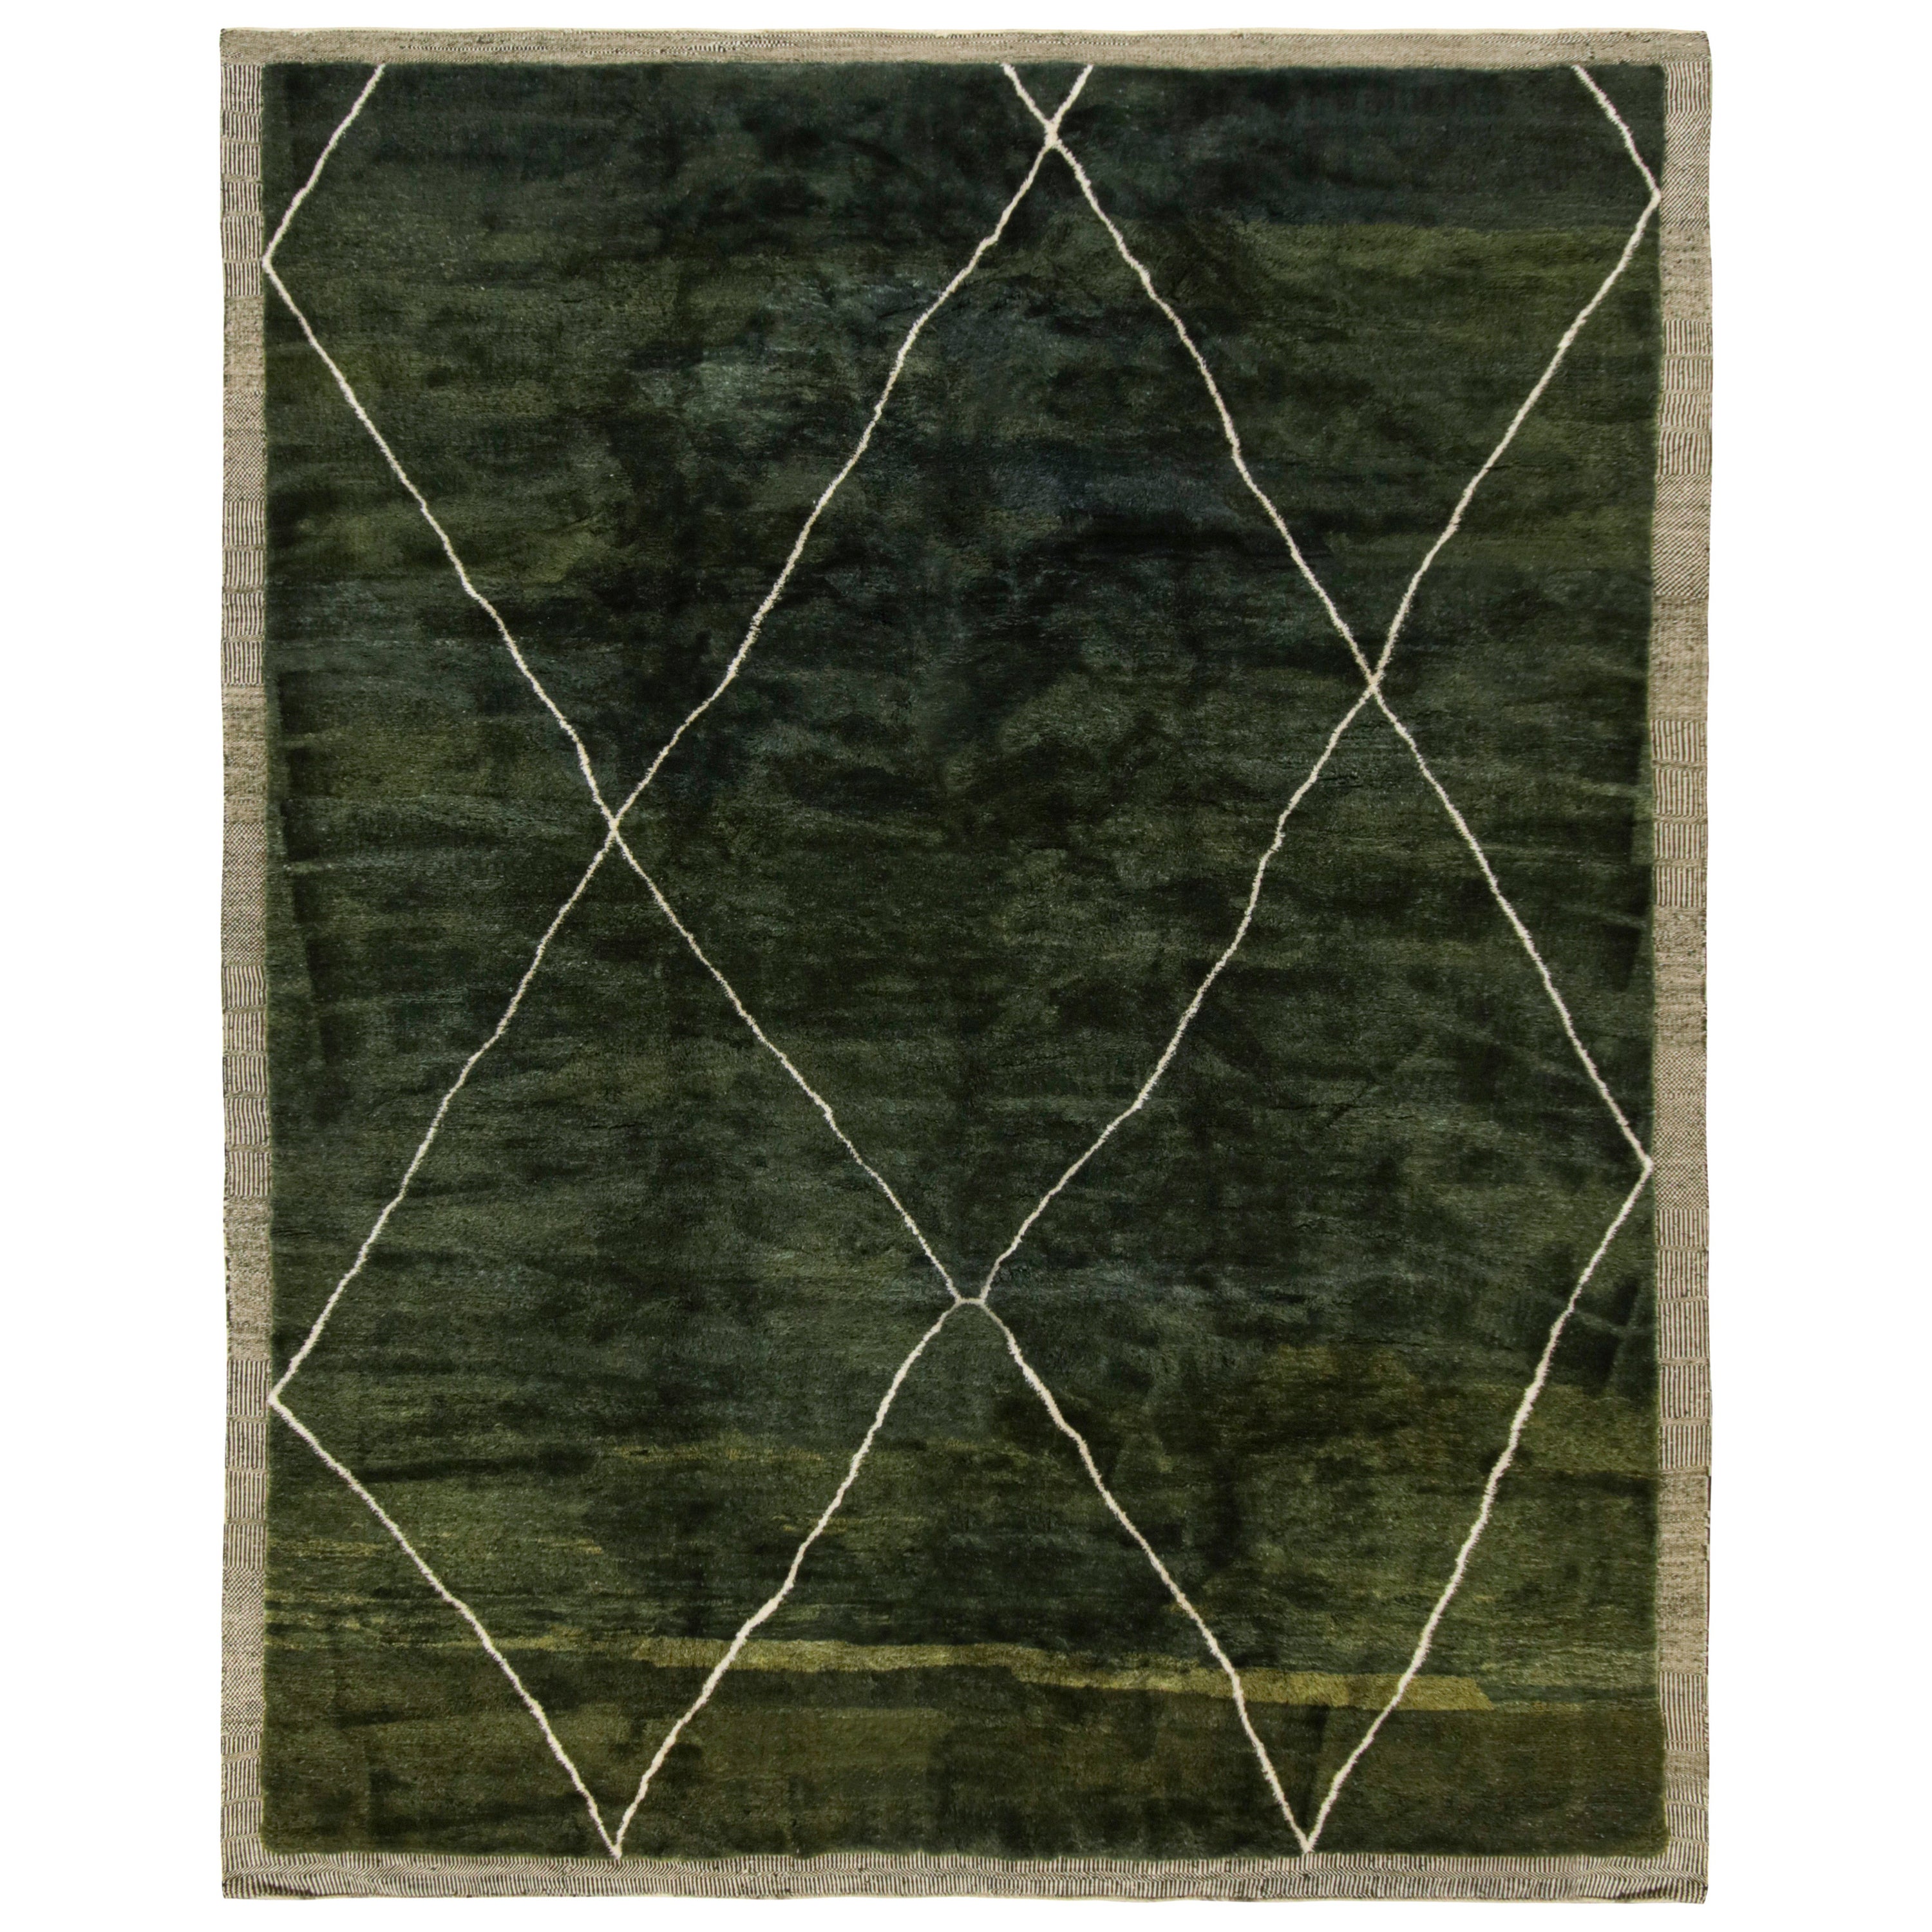 Rug & Kilim’s Custom Moroccan Rug Design in Green with White Lozenge Patterns For Sale